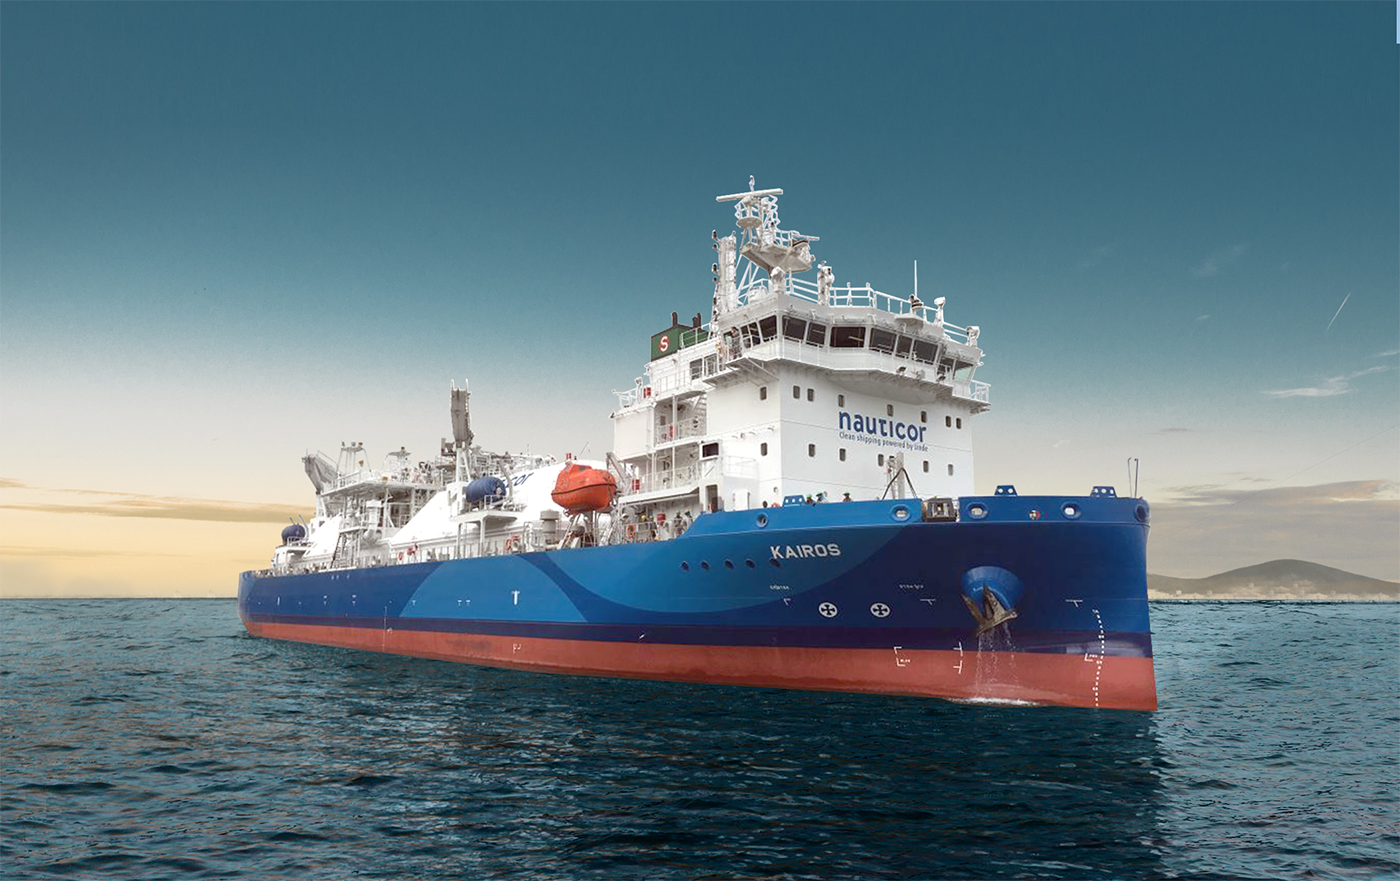 MV Kairos, an LNG bunkering vessel by Babcock Schulte Energy